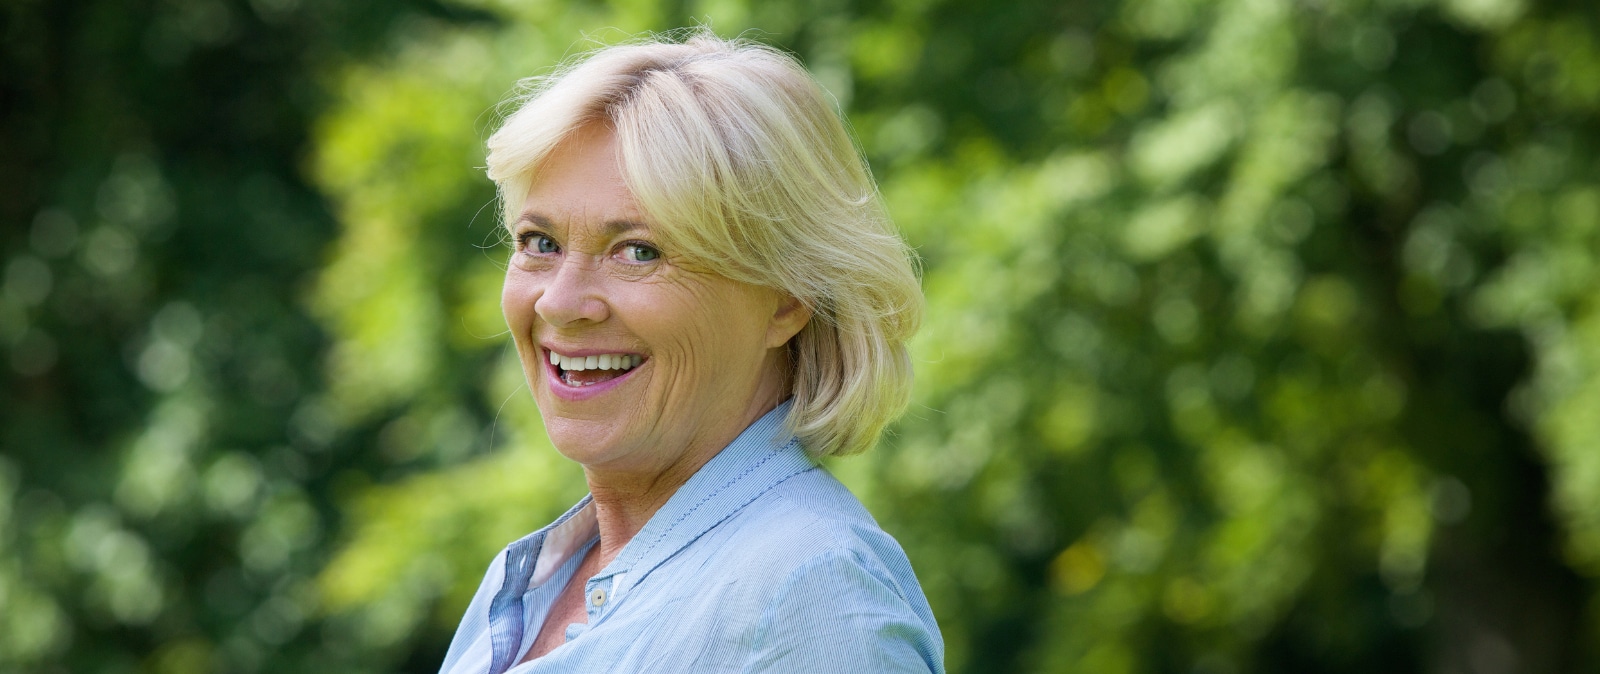 am i a good candidate for dental implants?